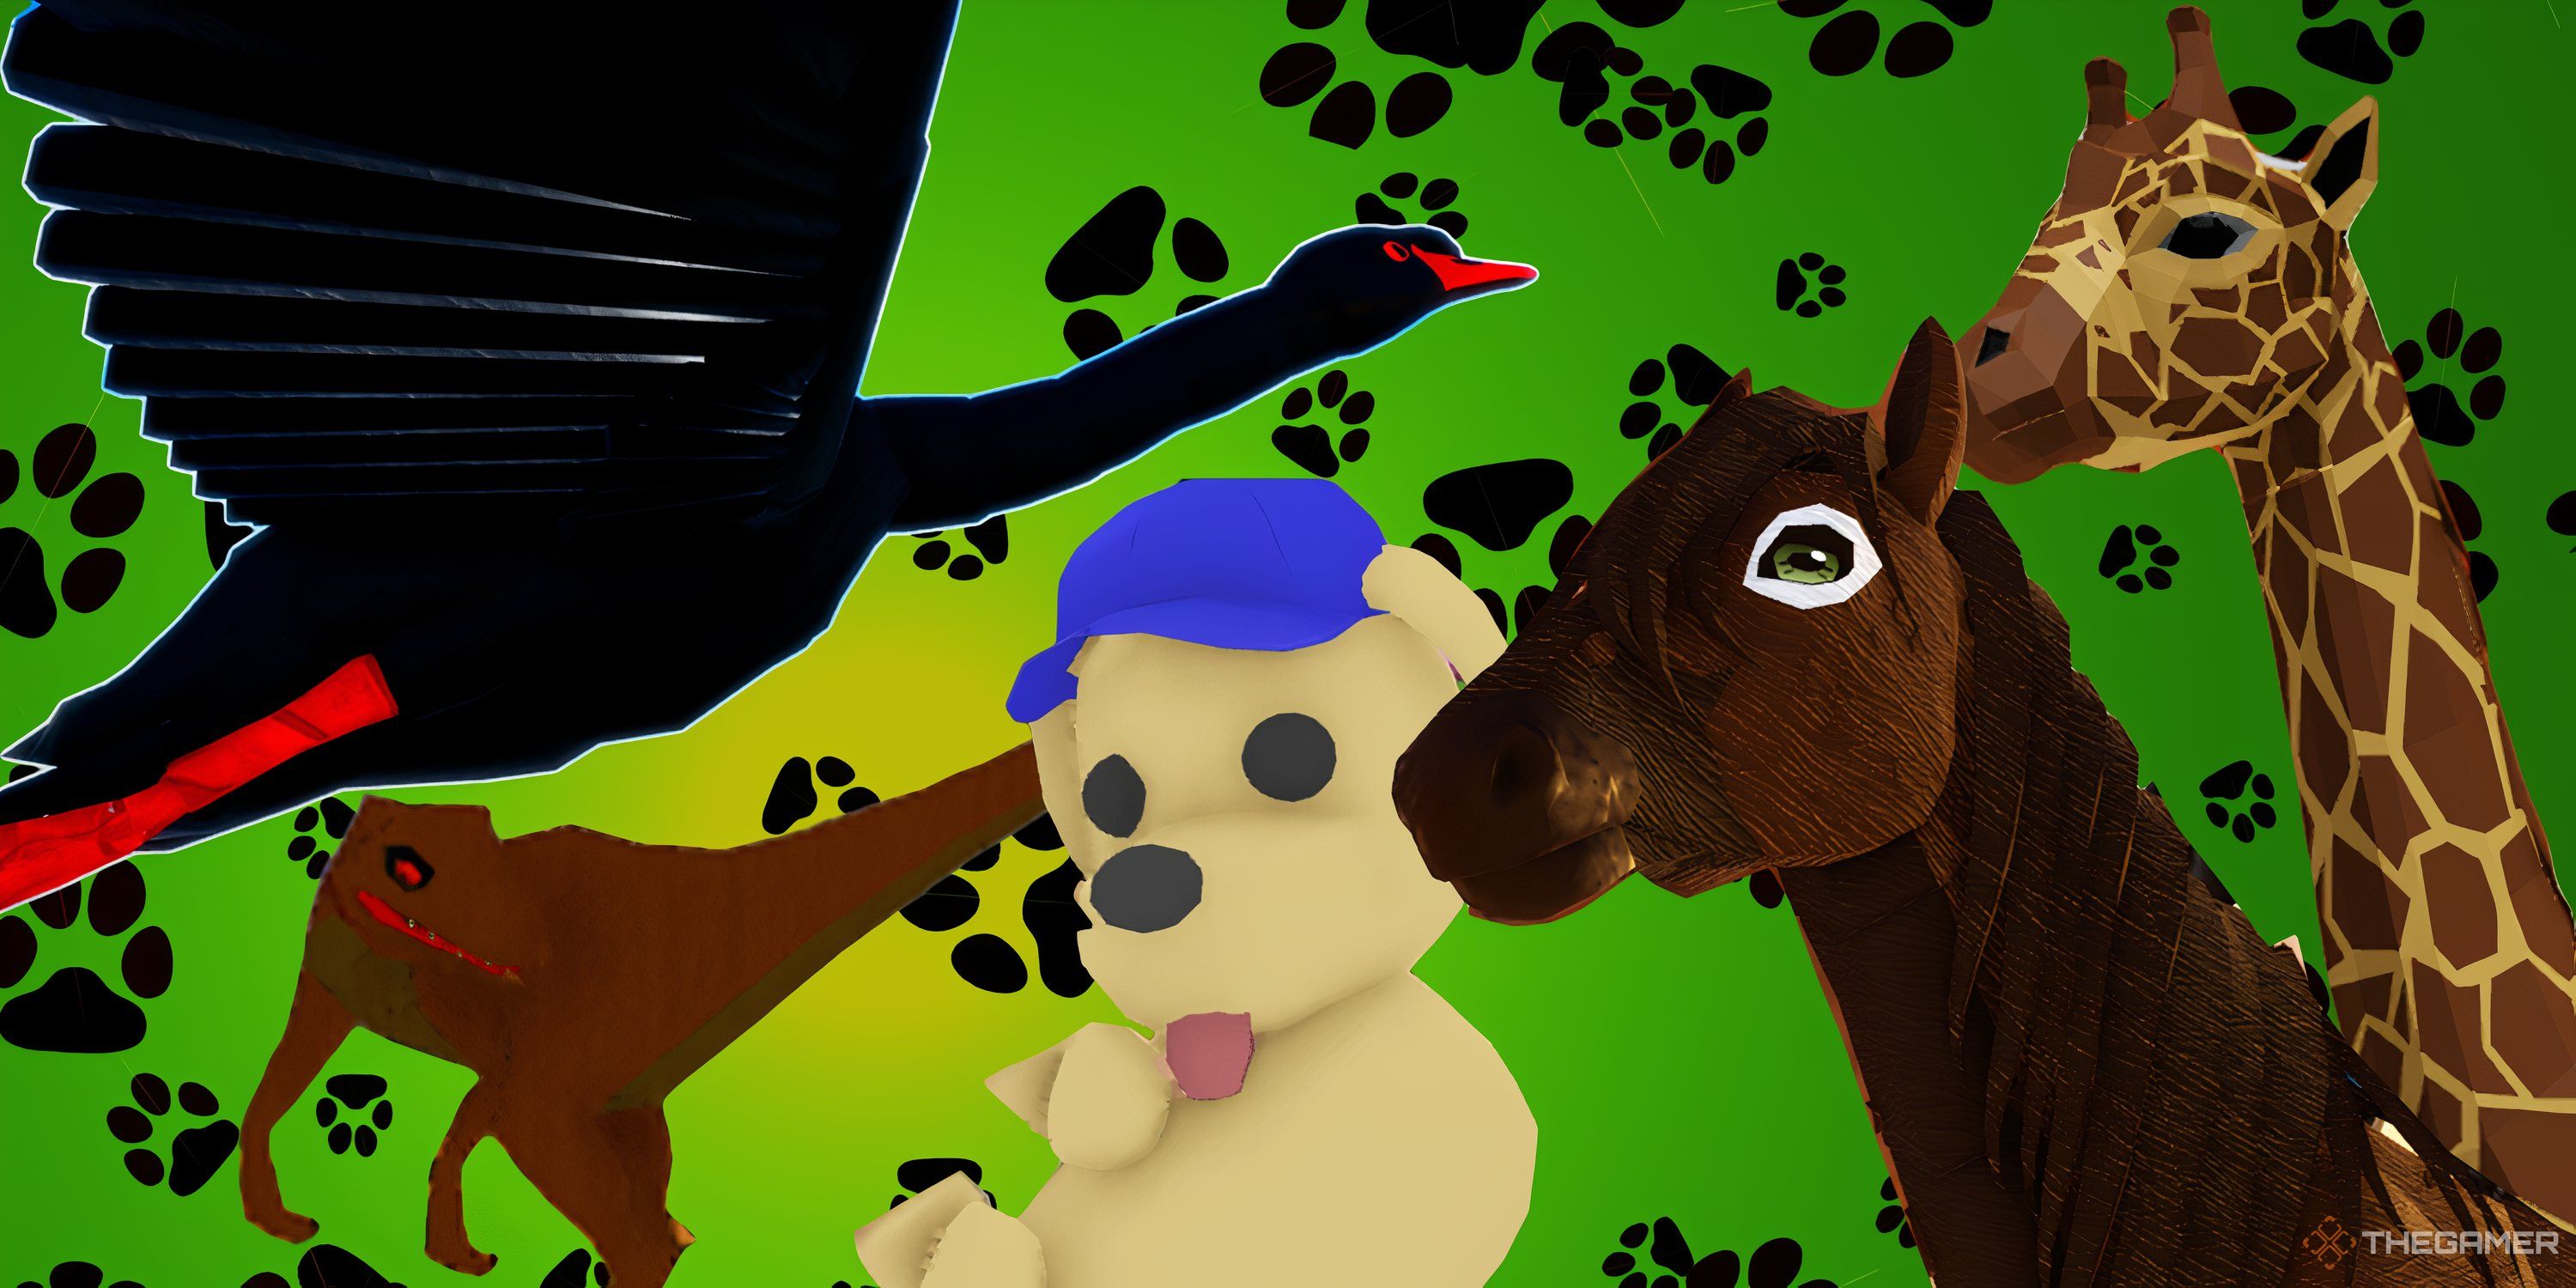 A Roblox-Esque black swan, velociraptor, labrador puppy, horse, and a giraffe pose in front of a green and yellow gradient littered with paw prints.